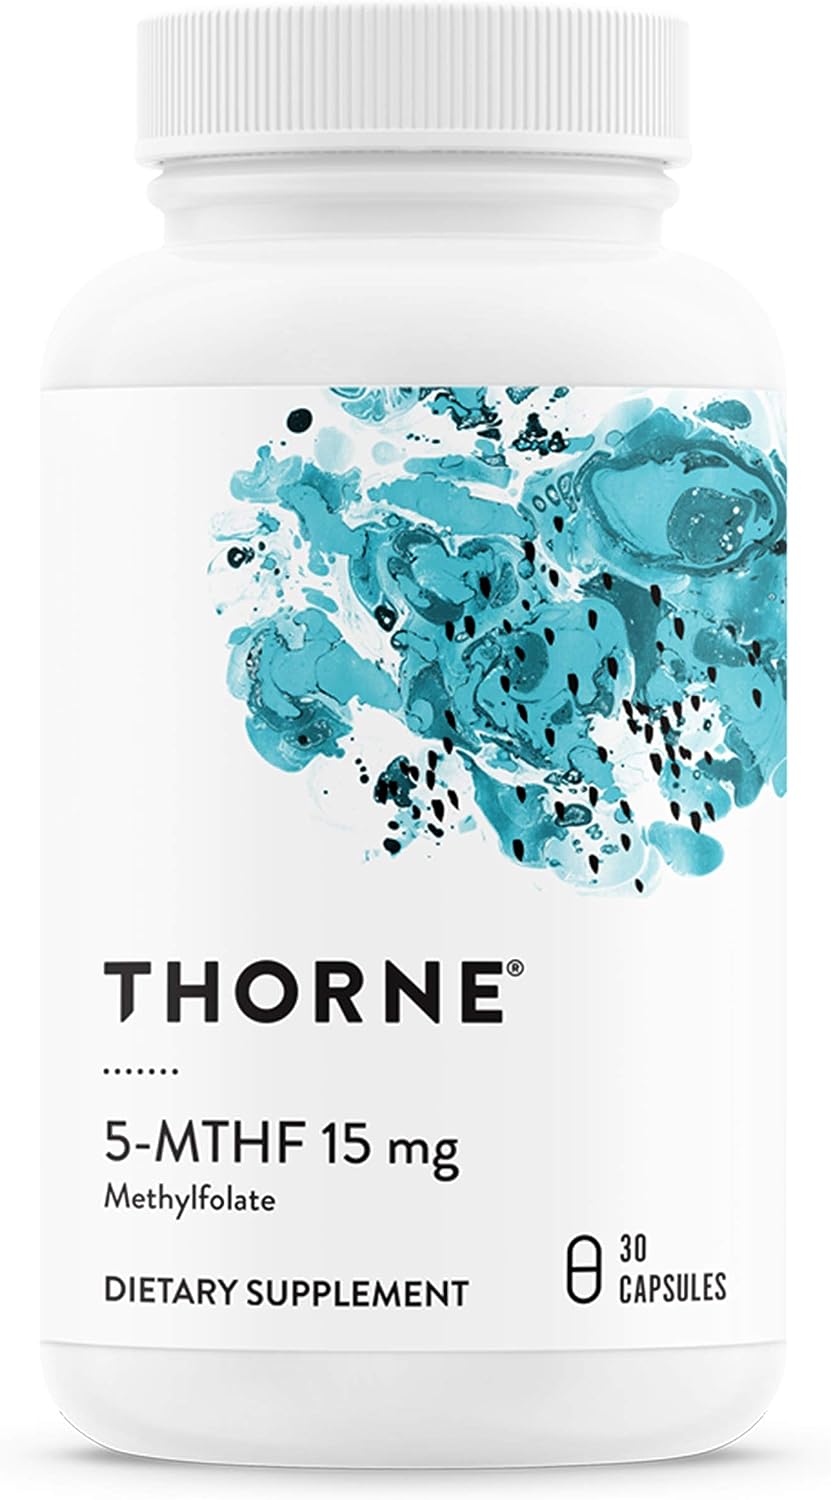 Thorne 5-MTHF 15mg - Methylfolate (Active B9 Folate) Supplement - Supports Cardiovascular Health, Fetal Development, Nerve Health, Methylation, and Homocysteine Levels - 30 Capsules